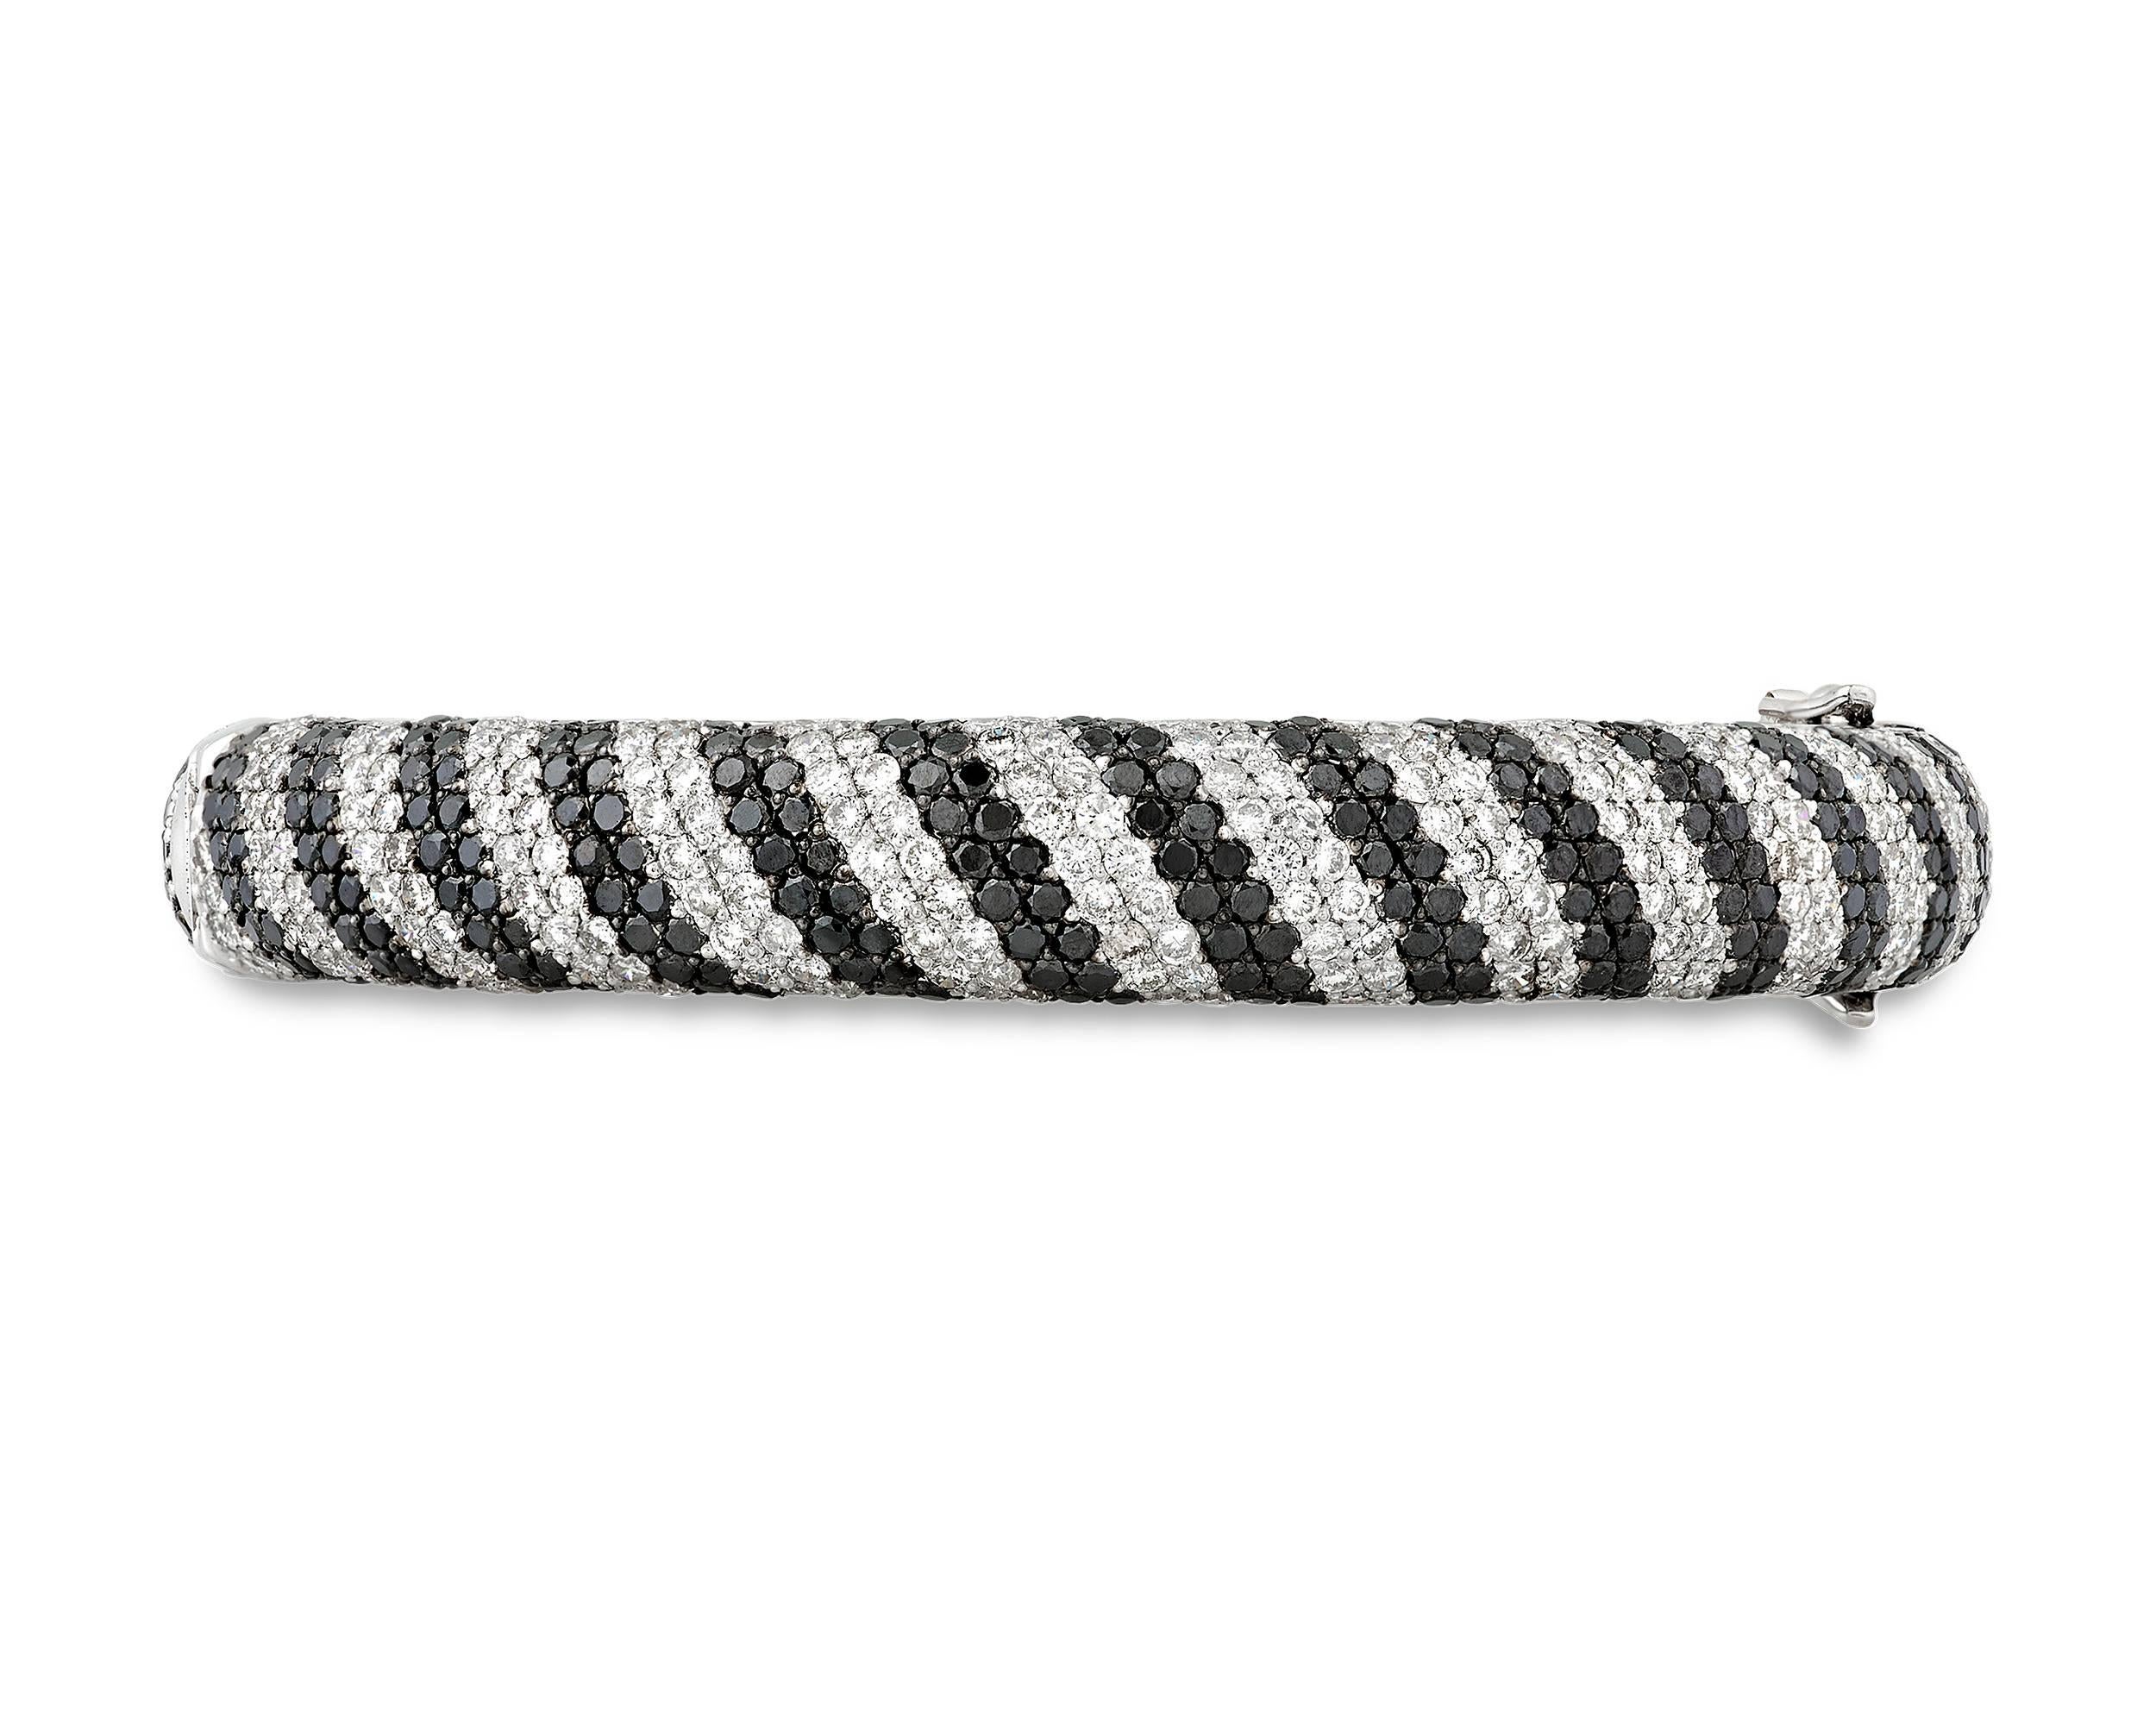 This elegant black and white diamond bangle bracelet boasts a sophisticated and streamlined design. Rows of black diamonds weighing approximately 9.94 total carats alternate with approximately 9.94 total carats of white diamonds in a bold stripe